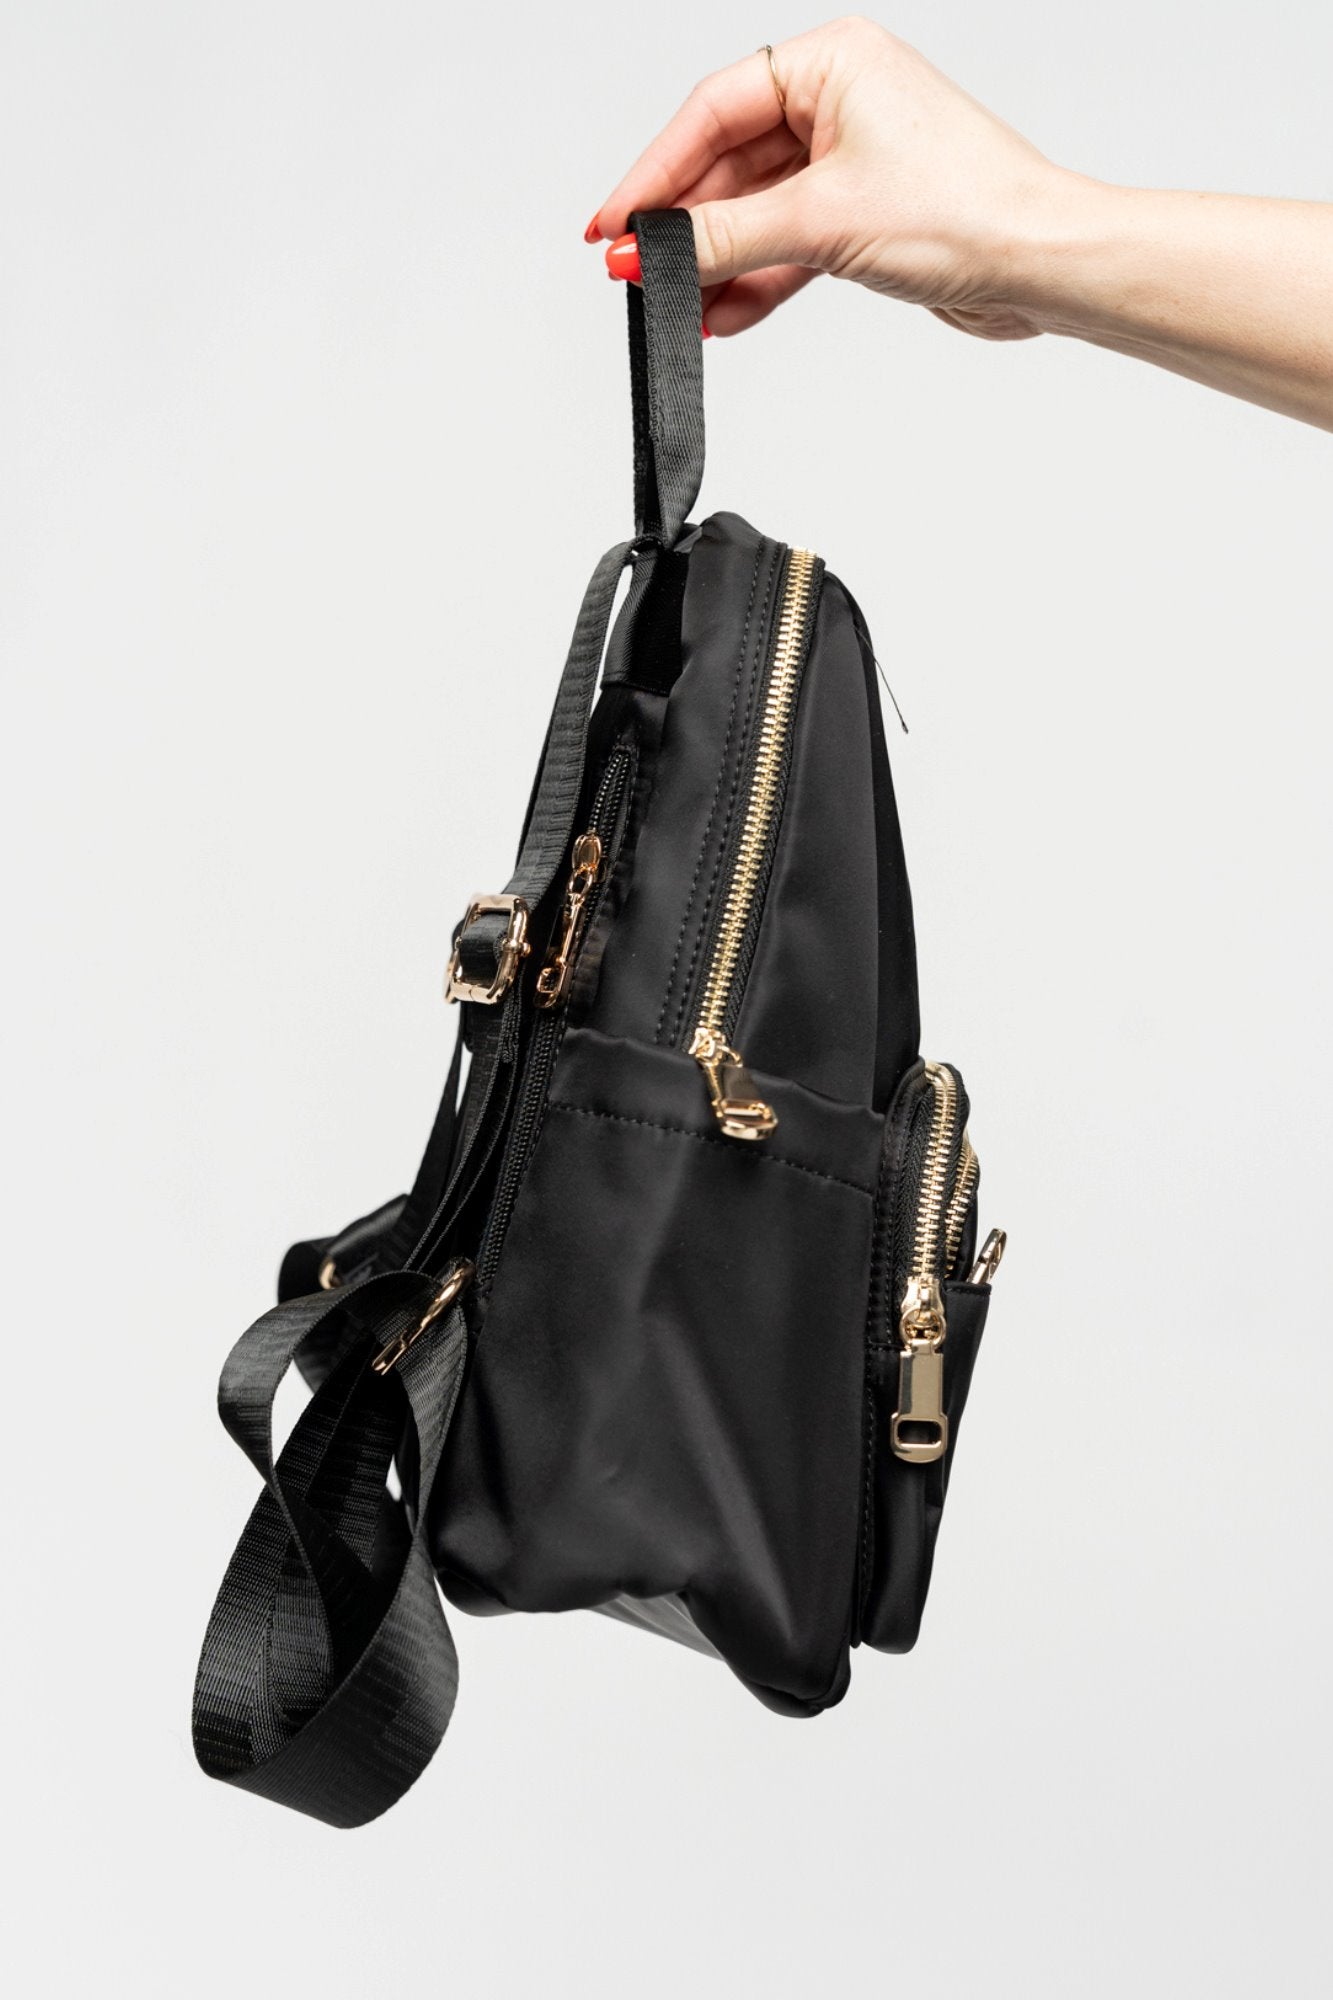 Sutton Bag in Black Holley Girl 